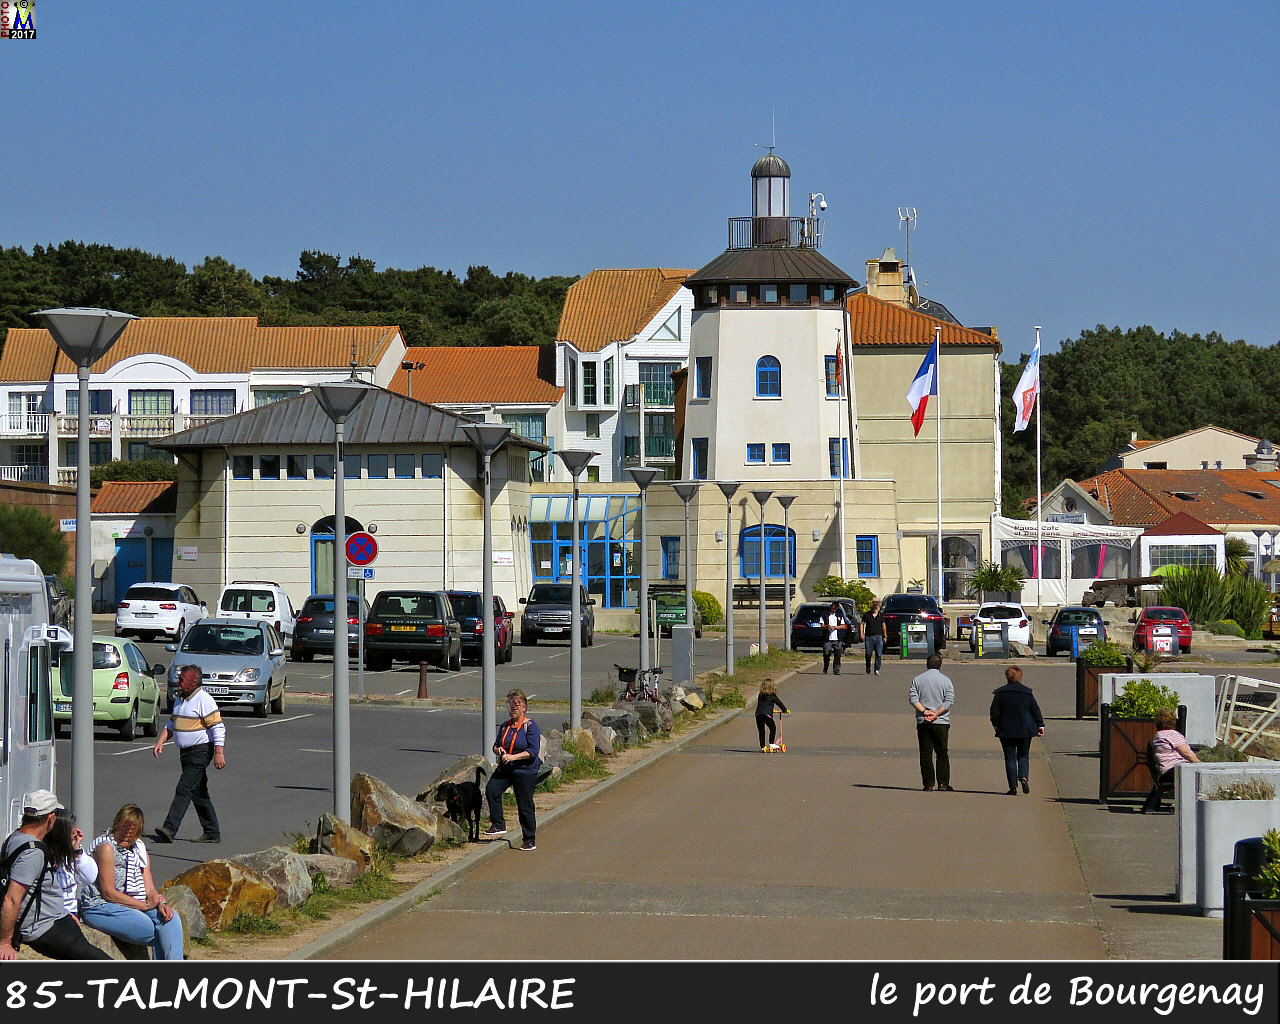 85TALMONT-StHILAIRE_Bourgenay_1006.jpg